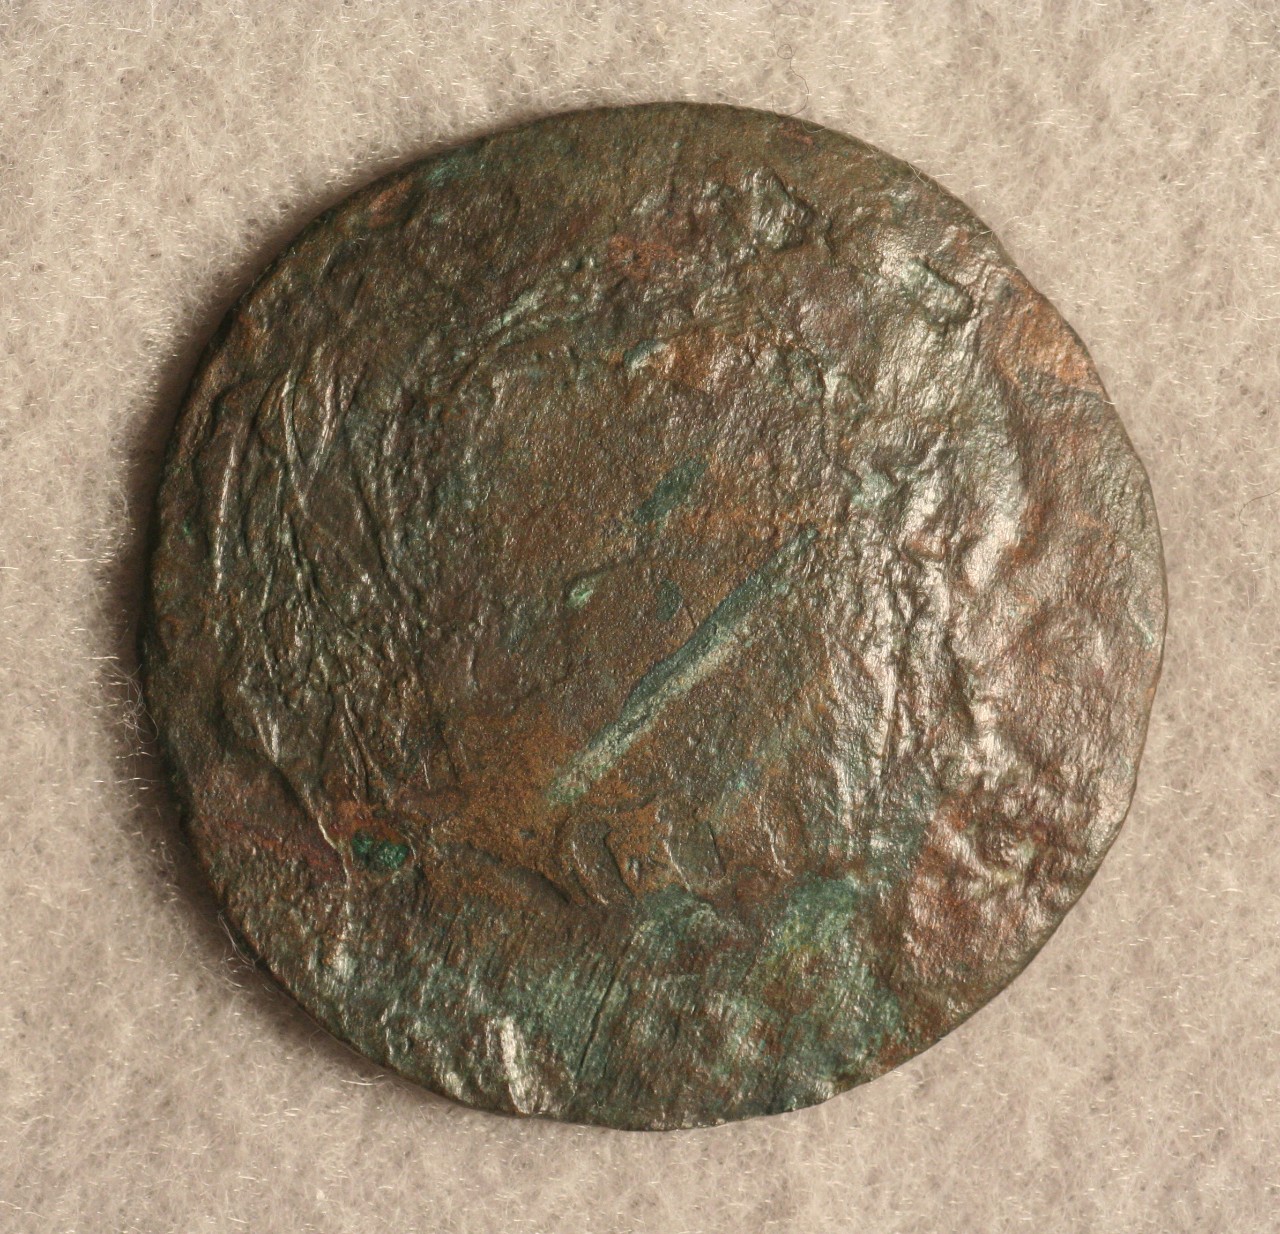 <p>A round bronze Brazilian 40-Reis coin recovered from the CSS Alabama. On the obverse side is a stamped 40 in the center with a ring of garland around it and below the 40 is faded letters “RUS.I. D.C. CON”. This coin was produced during the reign of King Pedro I of Brazil.</p>